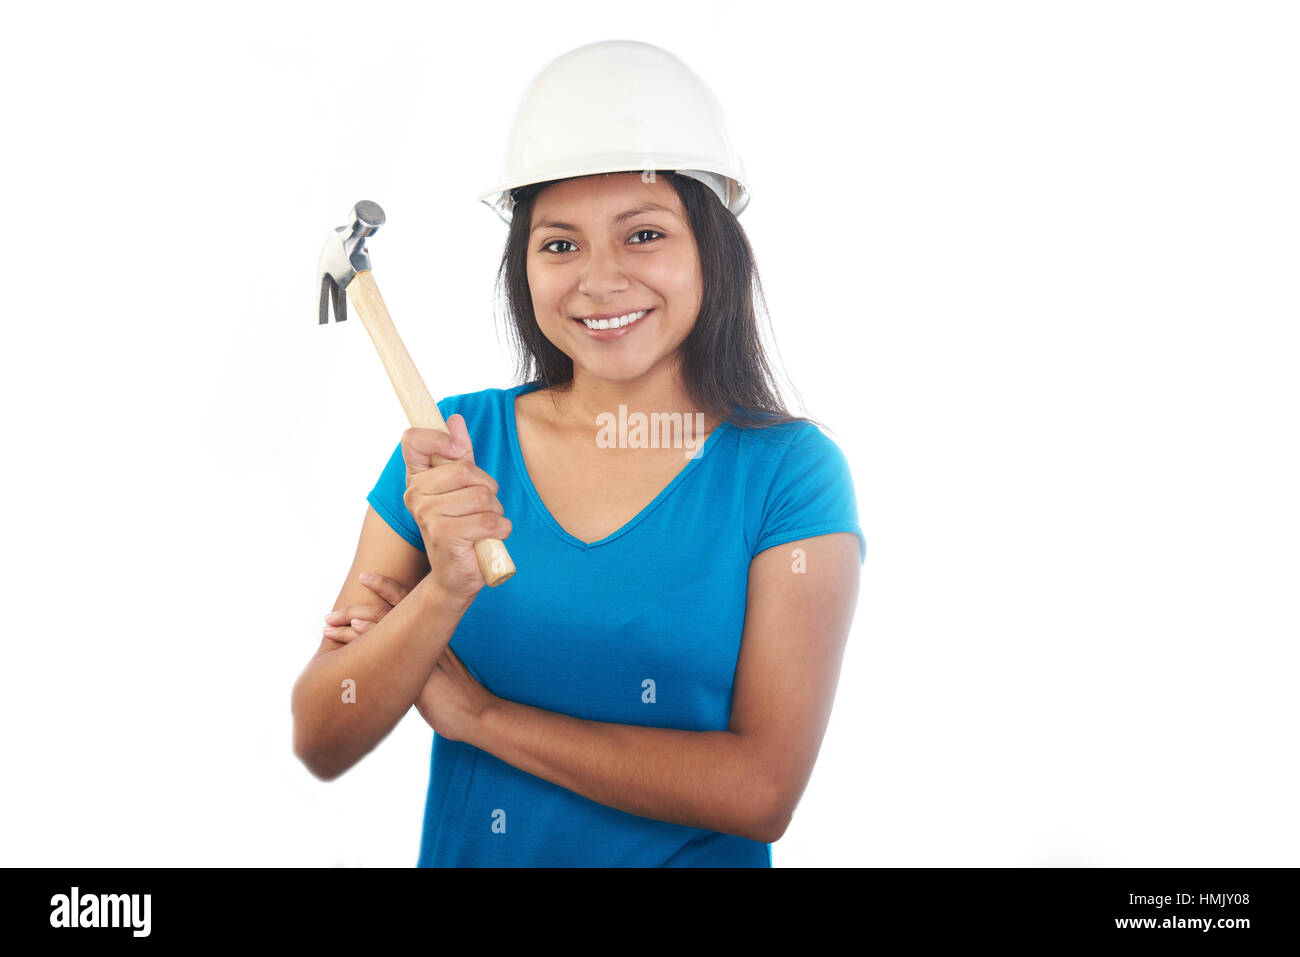 Girl with construction hat and hammer on a white background Stock Photo